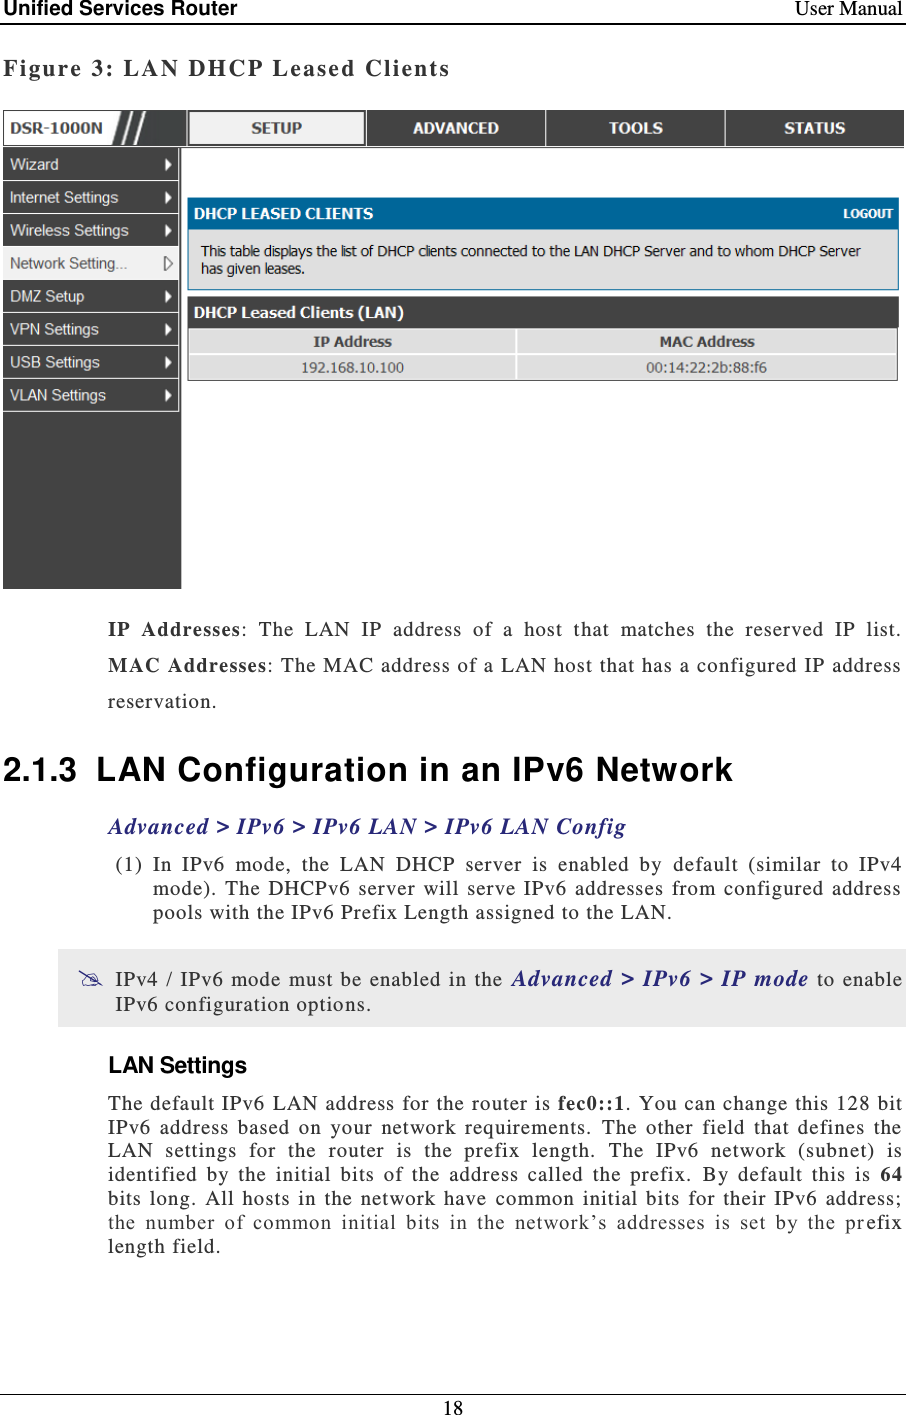 Unified Services Router    User Manual 18  Figure 3: LAN DHCP Lease d Clients   IP  Addresses:  The  LAN  IP  address  of  a  host  that  matches  the  reserved  IP  list.  MAC Addresses: The MAC address of a LAN host that has a configured IP address reservation. 2.1.3  LAN Configuration in an IPv6 Network Advanced &gt; IPv6 &gt; IPv6 LAN &gt; IPv6 LAN Config  (1) In  IPv6  mode,  the  LAN  DHCP  server  is  enabled  by  default  (similar  to  IPv4 mode).  The  DHCPv6  server  will  serve  IPv6  addresses  from  configured address pools with the IPv6 Prefix Length assigned to the LAN.   IPv4  / IPv6  mode must be  enabled  in the  Advanced &gt; IPv6 &gt;  IP mode  to enable IPv6 configuration options.  LAN Settings The default IPv6  LAN address  for the router is fec0::1. You can change this 128 bit IPv6  address  based  on  your  network  requirements.   The  other  field  that  defines  the LAN  settings  for  the  router  is  the  prefix  length.  The  IPv6  network  (subnet)  is identified  by  the  initial  bits  of  the  address  called  the  prefix.  By  default  this  is  64 bits  long.  All hosts  in  the  network  have  common  initial  bits  for  their  IPv6  address; the  number  of  common  initial  bits  in  the  network’s  addresses  is  set  by  the  pr efix length field. 